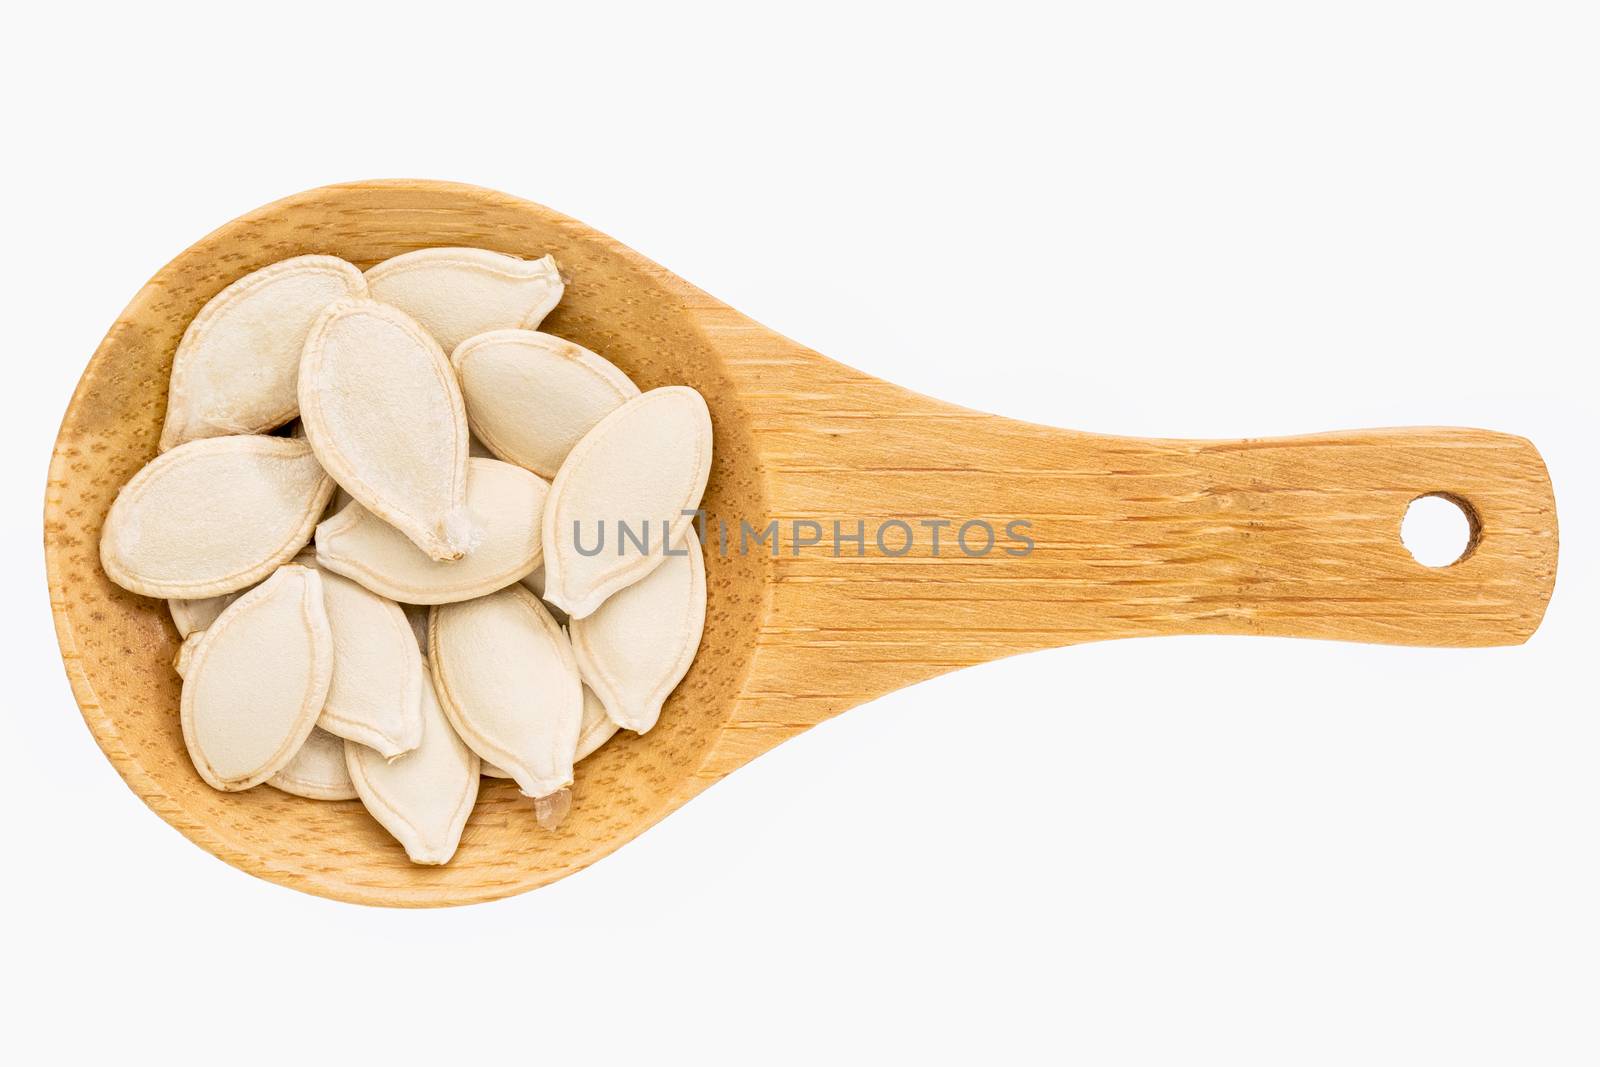 pumpkin seeds on a small wooden spoon isolated on white with a clipping path